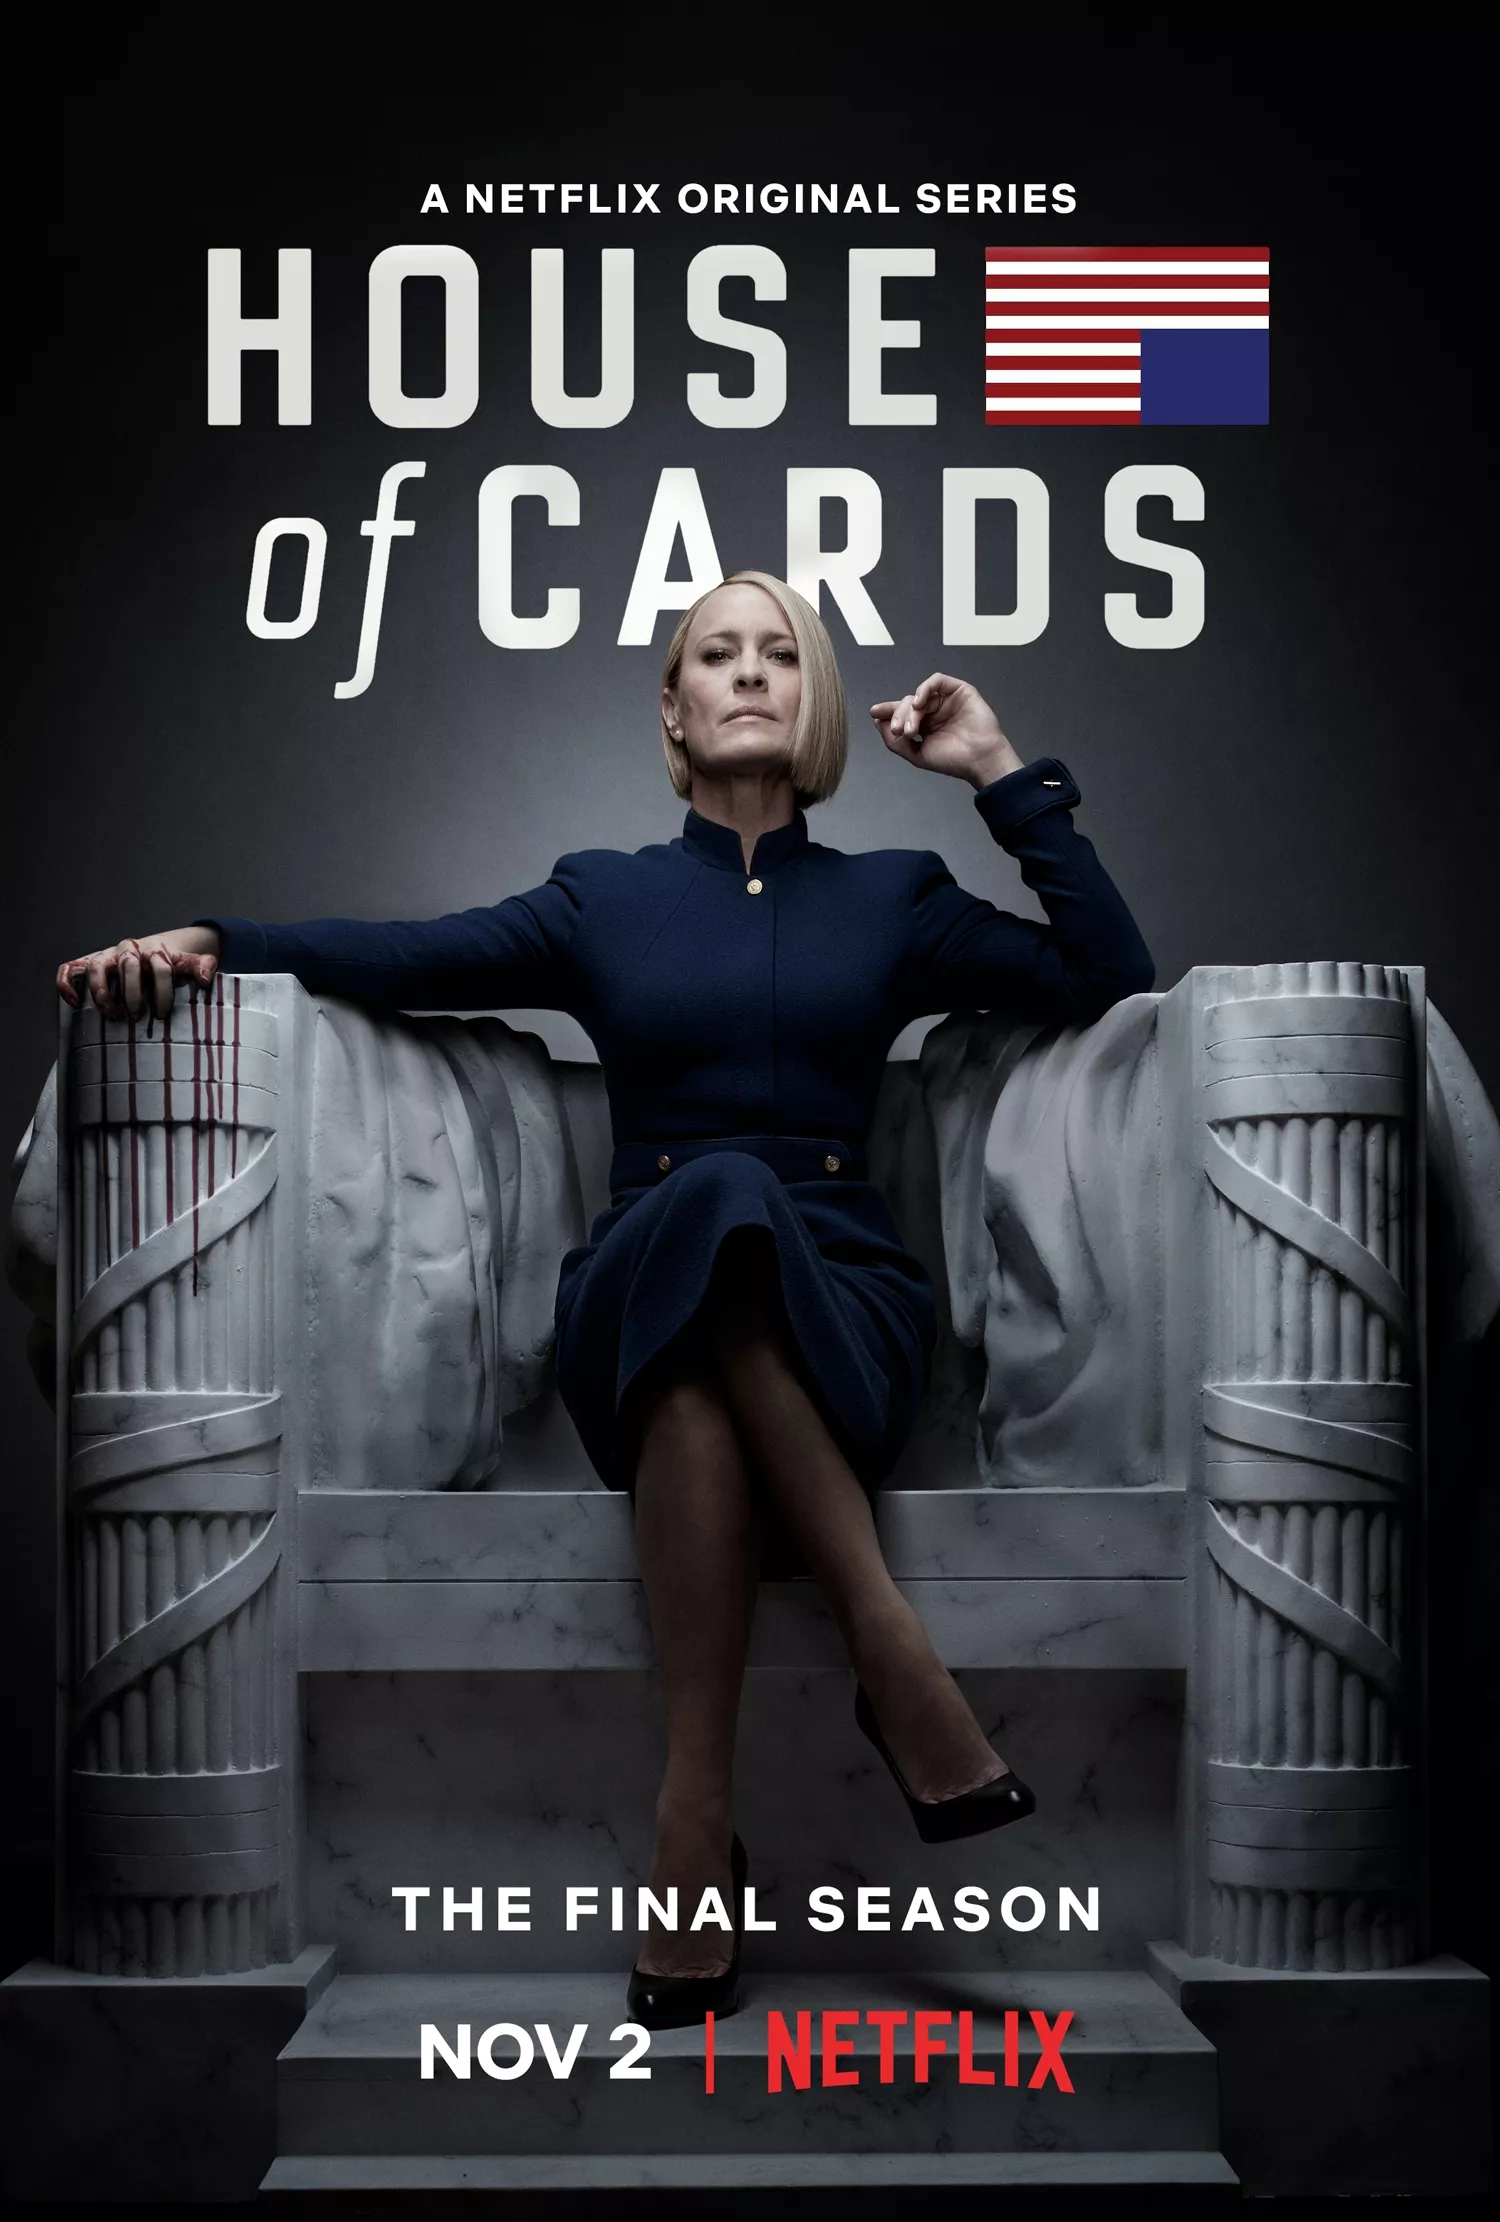 We finally have a date for the final season of House of Cards